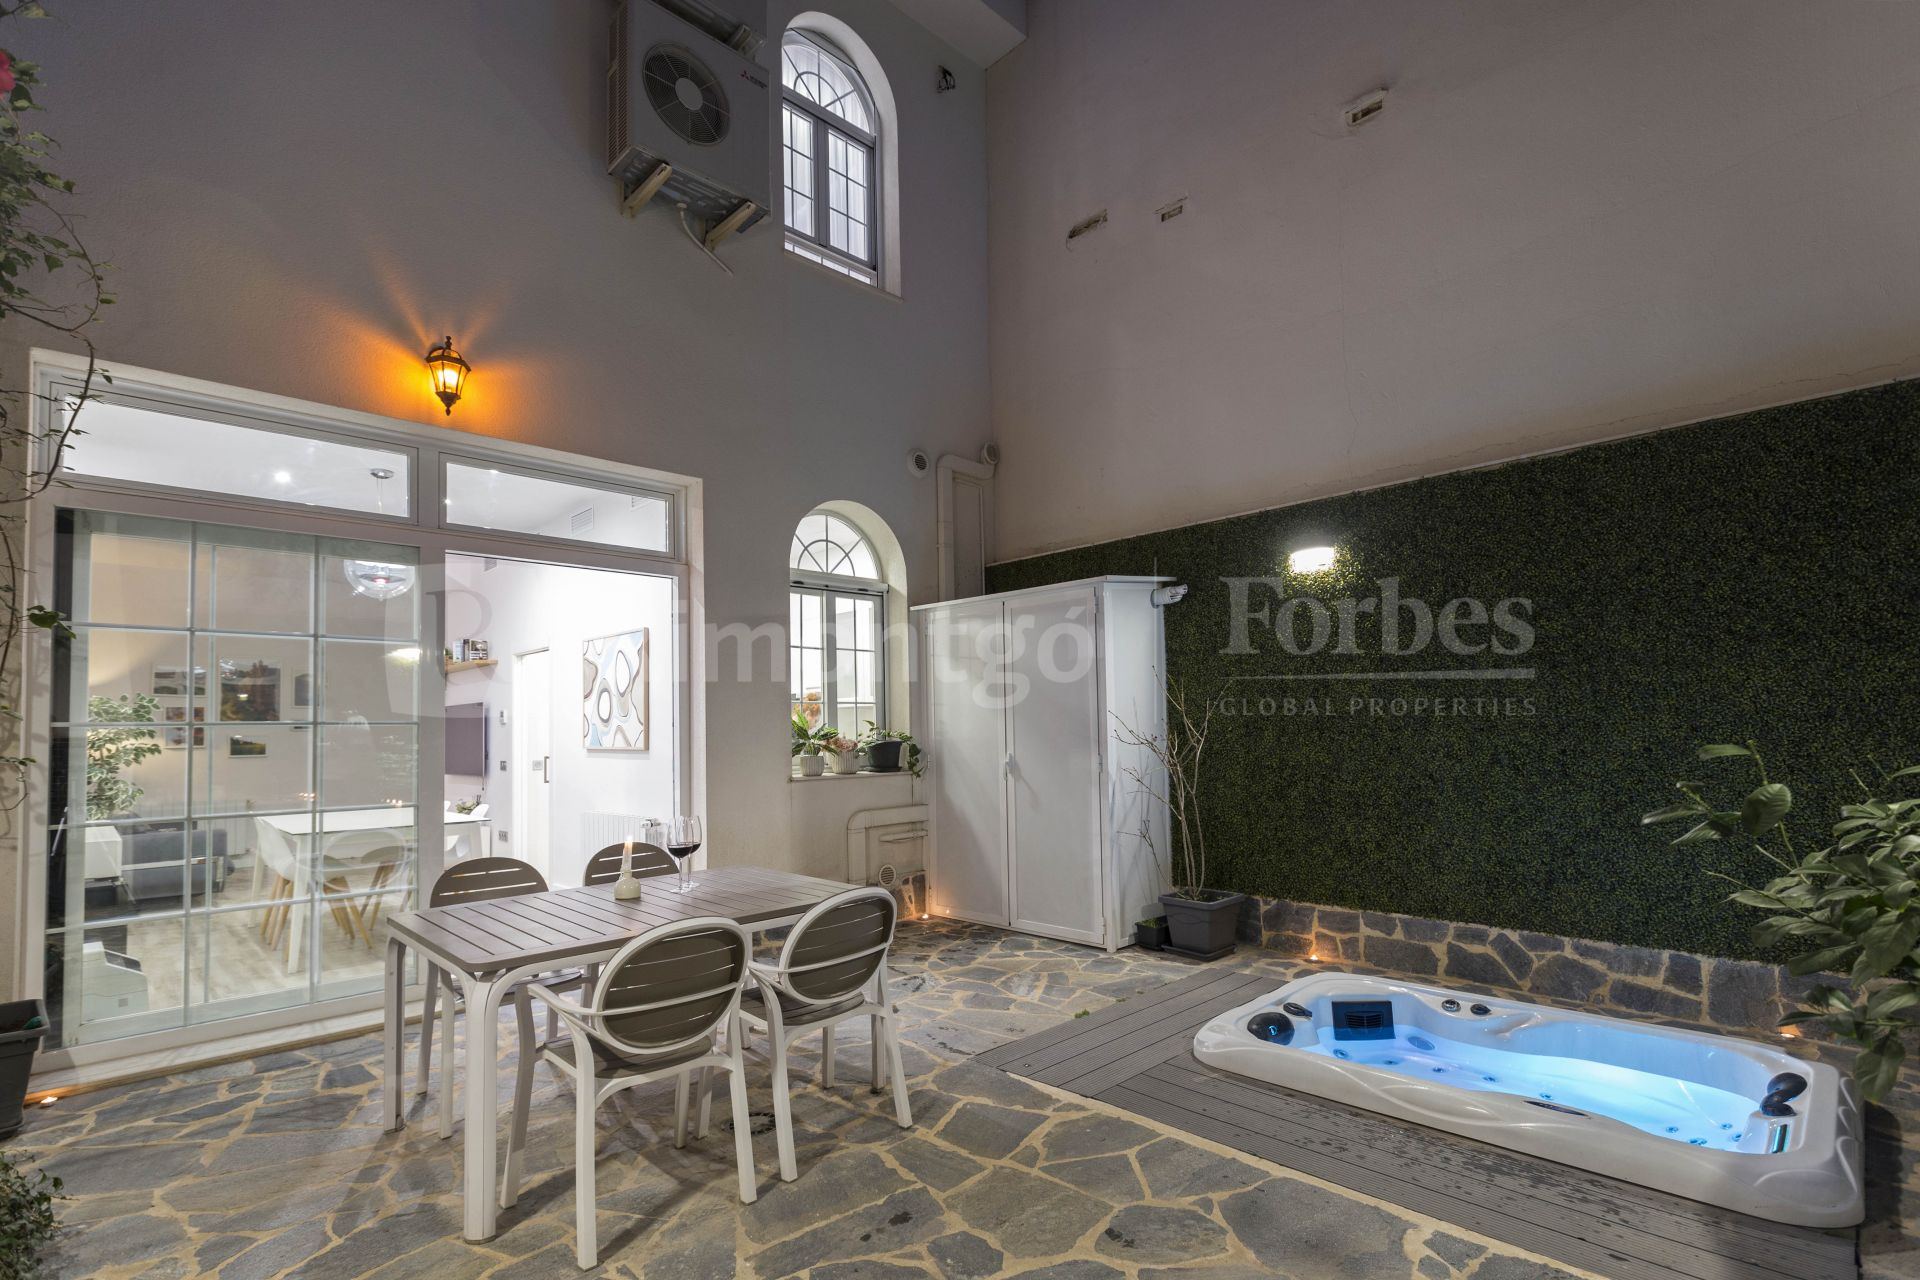 Single-family house with indoor patio with Jacuzzi for sale in Valencia's centre.